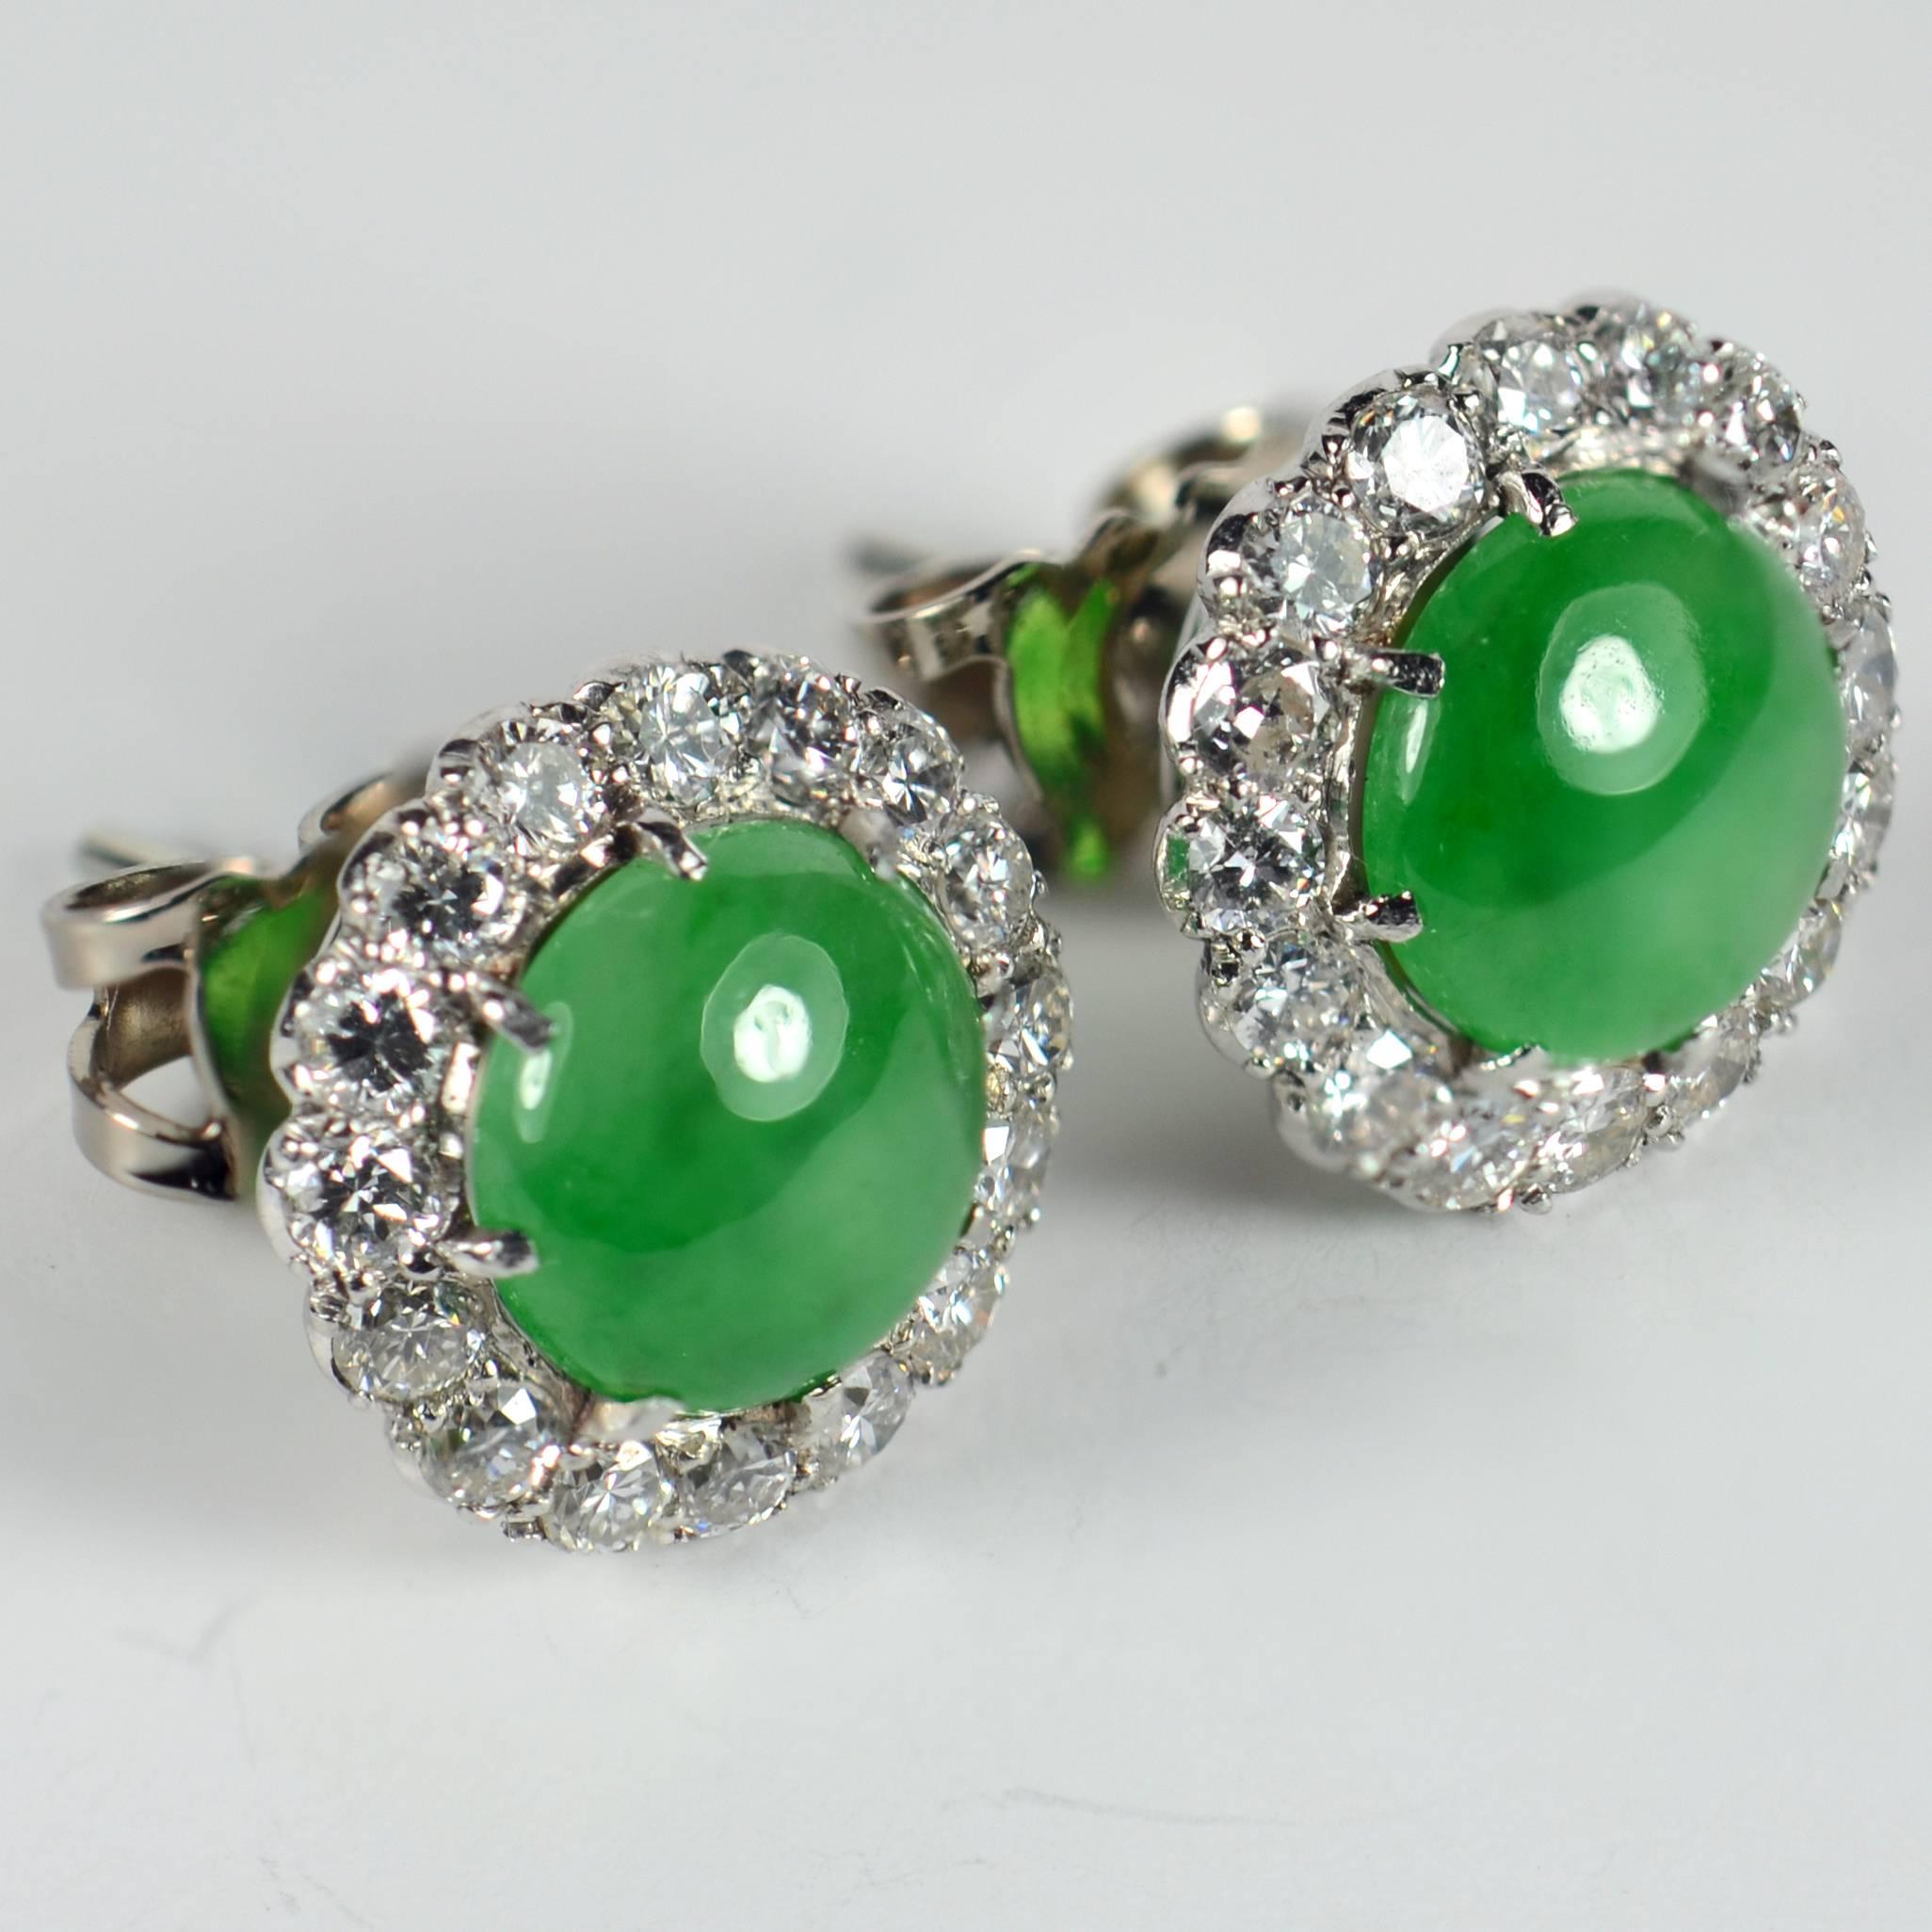 A pair of simple, elegant, cluster stud earrings with untreated green jadeite jade round cabochons surrounded by diamonds. The untreated jadeite is a lovely intense green with good translucency and a relatively even distribution of colour. The 32